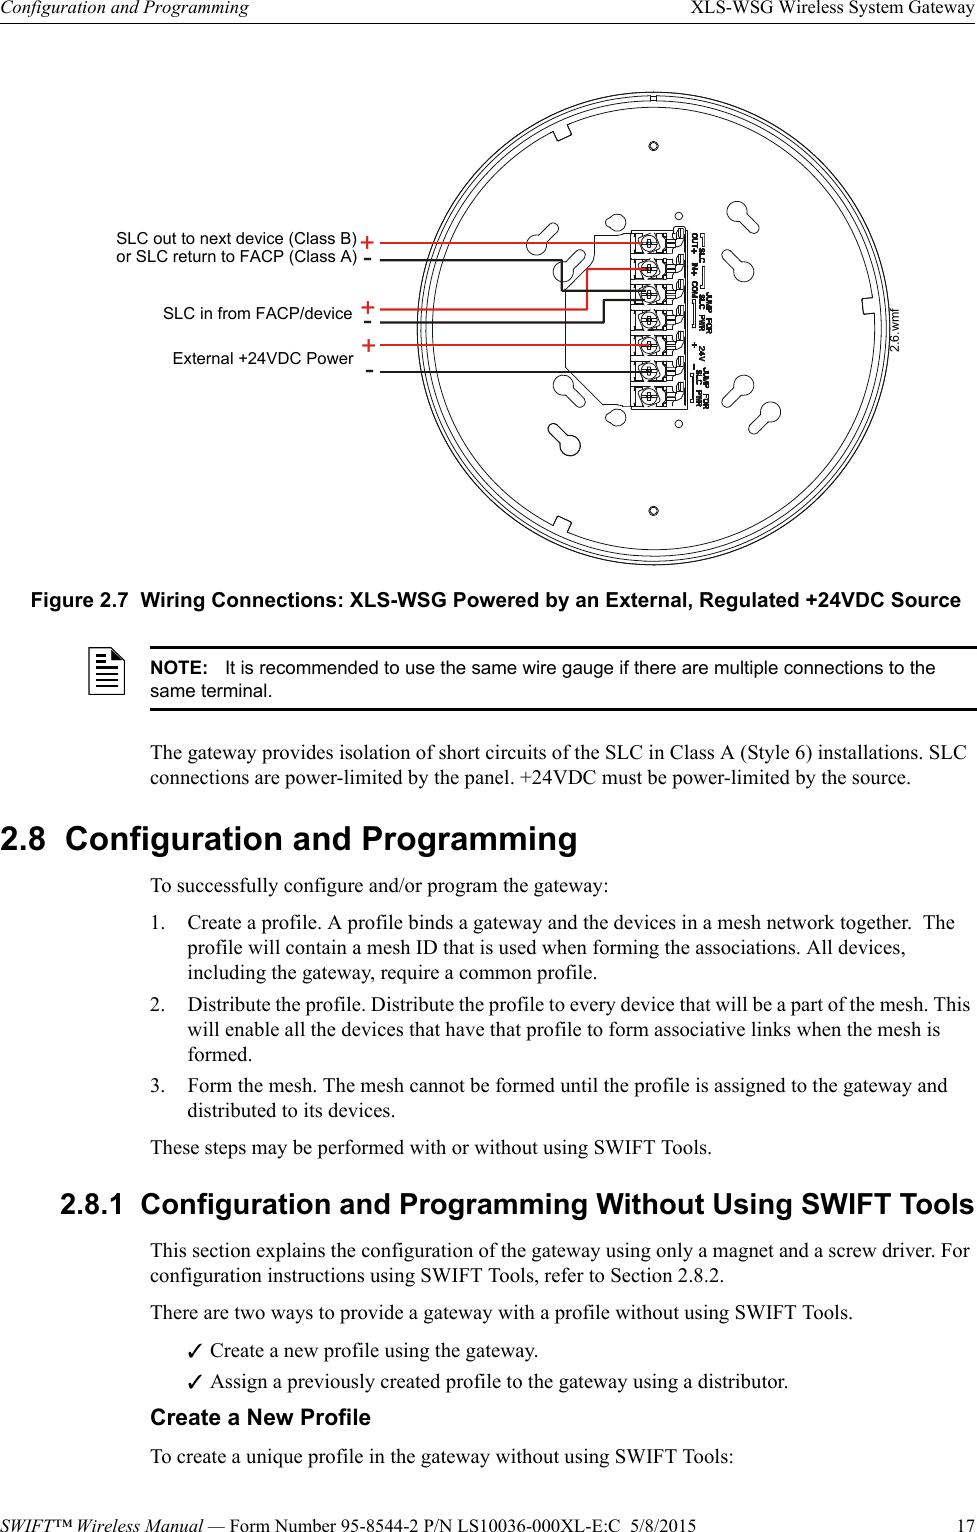 SWIFT™ Wireless Manual — Form Number 95-8544-2 P/N LS10036-000XL-E:C  5/8/2015  17Configuration and Programming XLS-WSG Wireless System GatewayThe gateway provides isolation of short circuits of the SLC in Class A (Style 6) installations. SLC connections are power-limited by the panel. +24VDC must be power-limited by the source.2.8  Configuration and ProgrammingTo successfully configure and/or program the gateway:1. Create a profile. A profile binds a gateway and the devices in a mesh network together.  The profile will contain a mesh ID that is used when forming the associations. All devices, including the gateway, require a common profile.2. Distribute the profile. Distribute the profile to every device that will be a part of the mesh. This will enable all the devices that have that profile to form associative links when the mesh is formed.3. Form the mesh. The mesh cannot be formed until the profile is assigned to the gateway and distributed to its devices. These steps may be performed with or without using SWIFT Tools.2.8.1  Configuration and Programming Without Using SWIFT ToolsThis section explains the configuration of the gateway using only a magnet and a screw driver. For configuration instructions using SWIFT Tools, refer to Section 2.8.2. There are two ways to provide a gateway with a profile without using SWIFT Tools.Create a new profile using the gateway.Assign a previously created profile to the gateway using a distributor.Create a New ProfileTo create a unique profile in the gateway without using SWIFT Tools: ++--+-Figure 2.7  Wiring Connections: XLS-WSG Powered by an External, Regulated +24VDC SourceSLC in from FACP/deviceExternal +24VDC PowerSLC out to next device (Class B)or SLC return to FACP (Class A)2.6.wmfNOTE: It is recommended to use the same wire gauge if there are multiple connections to the same terminal.